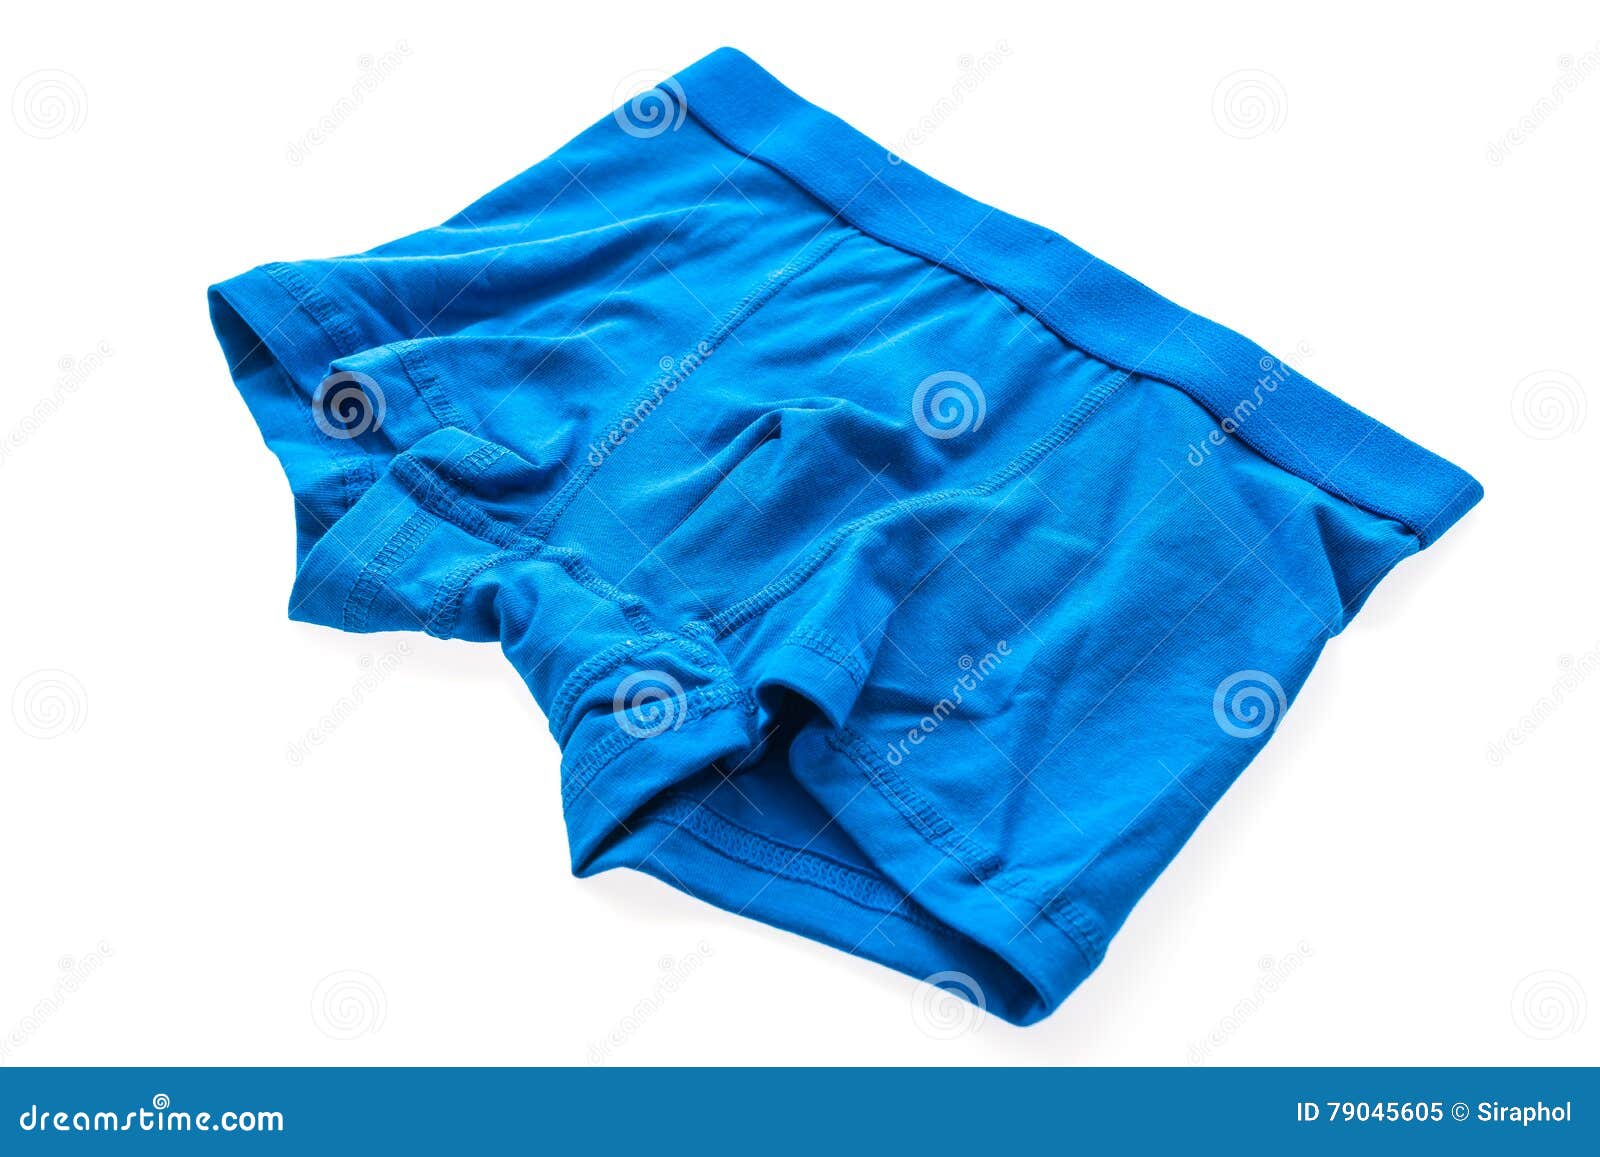 Underwear stock image. Image of pants, comfortable, textile - 79045605